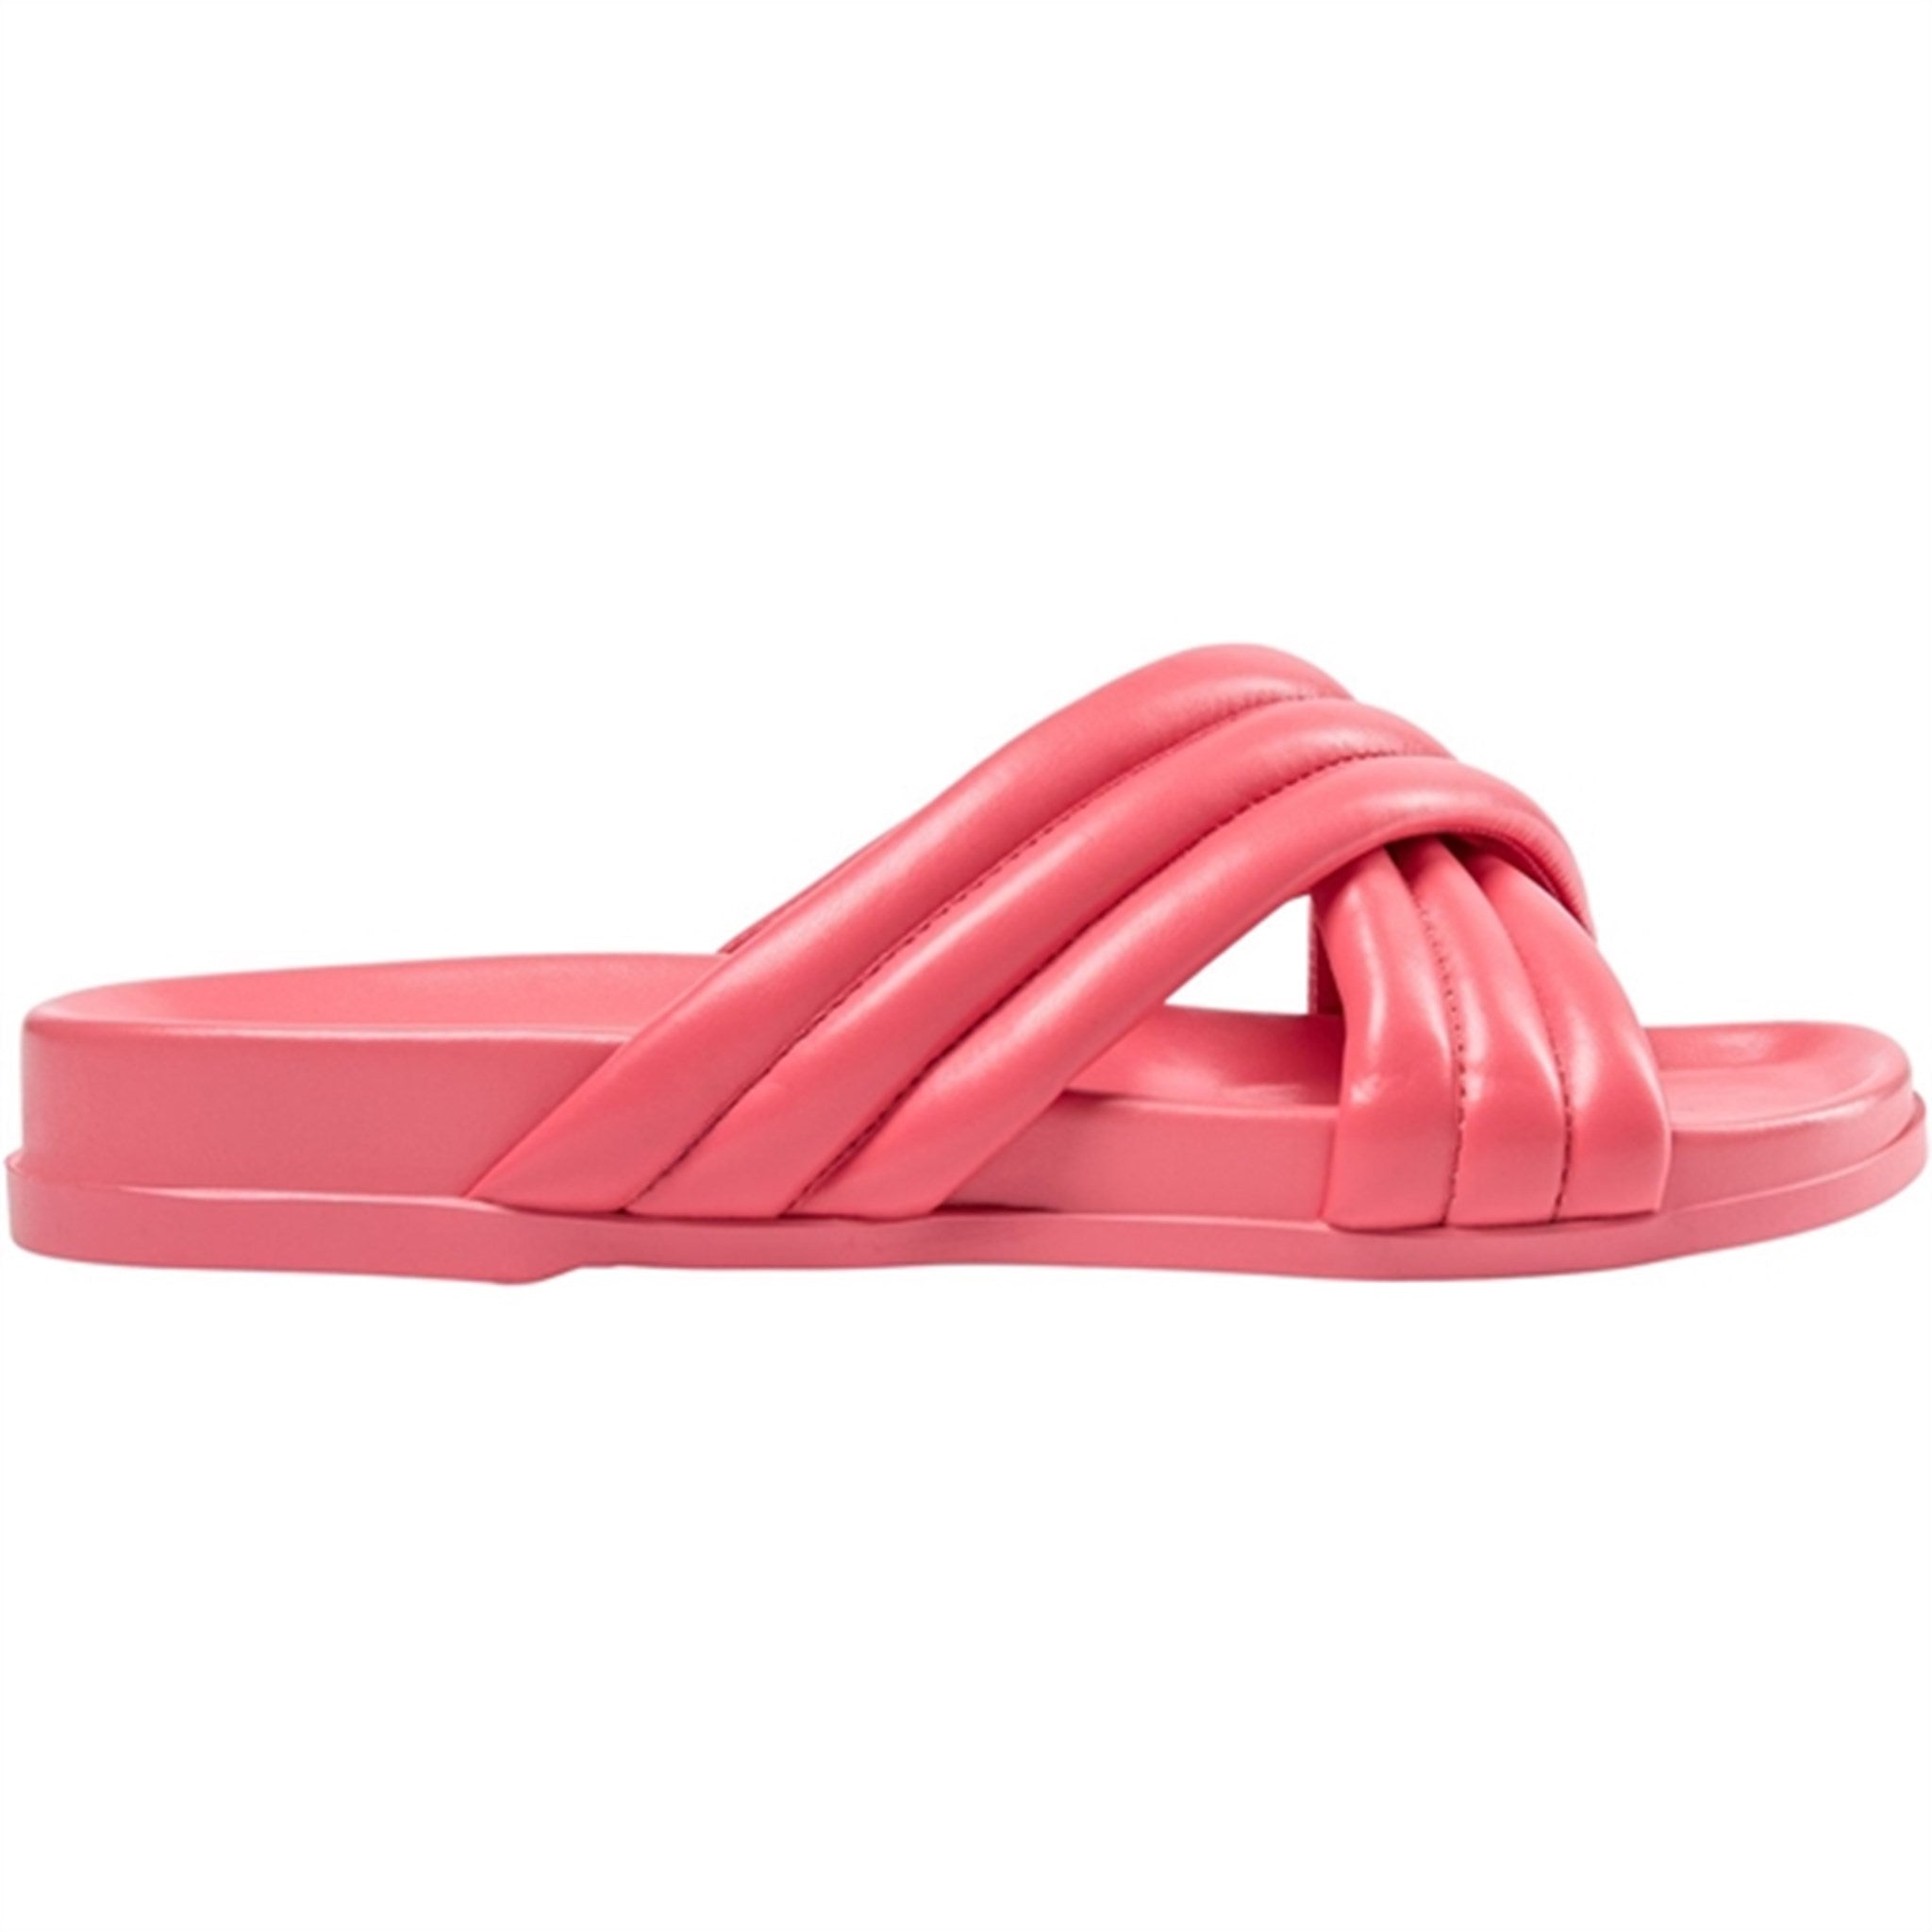 Sofie Schnoor Young Sandal Coral pink 5